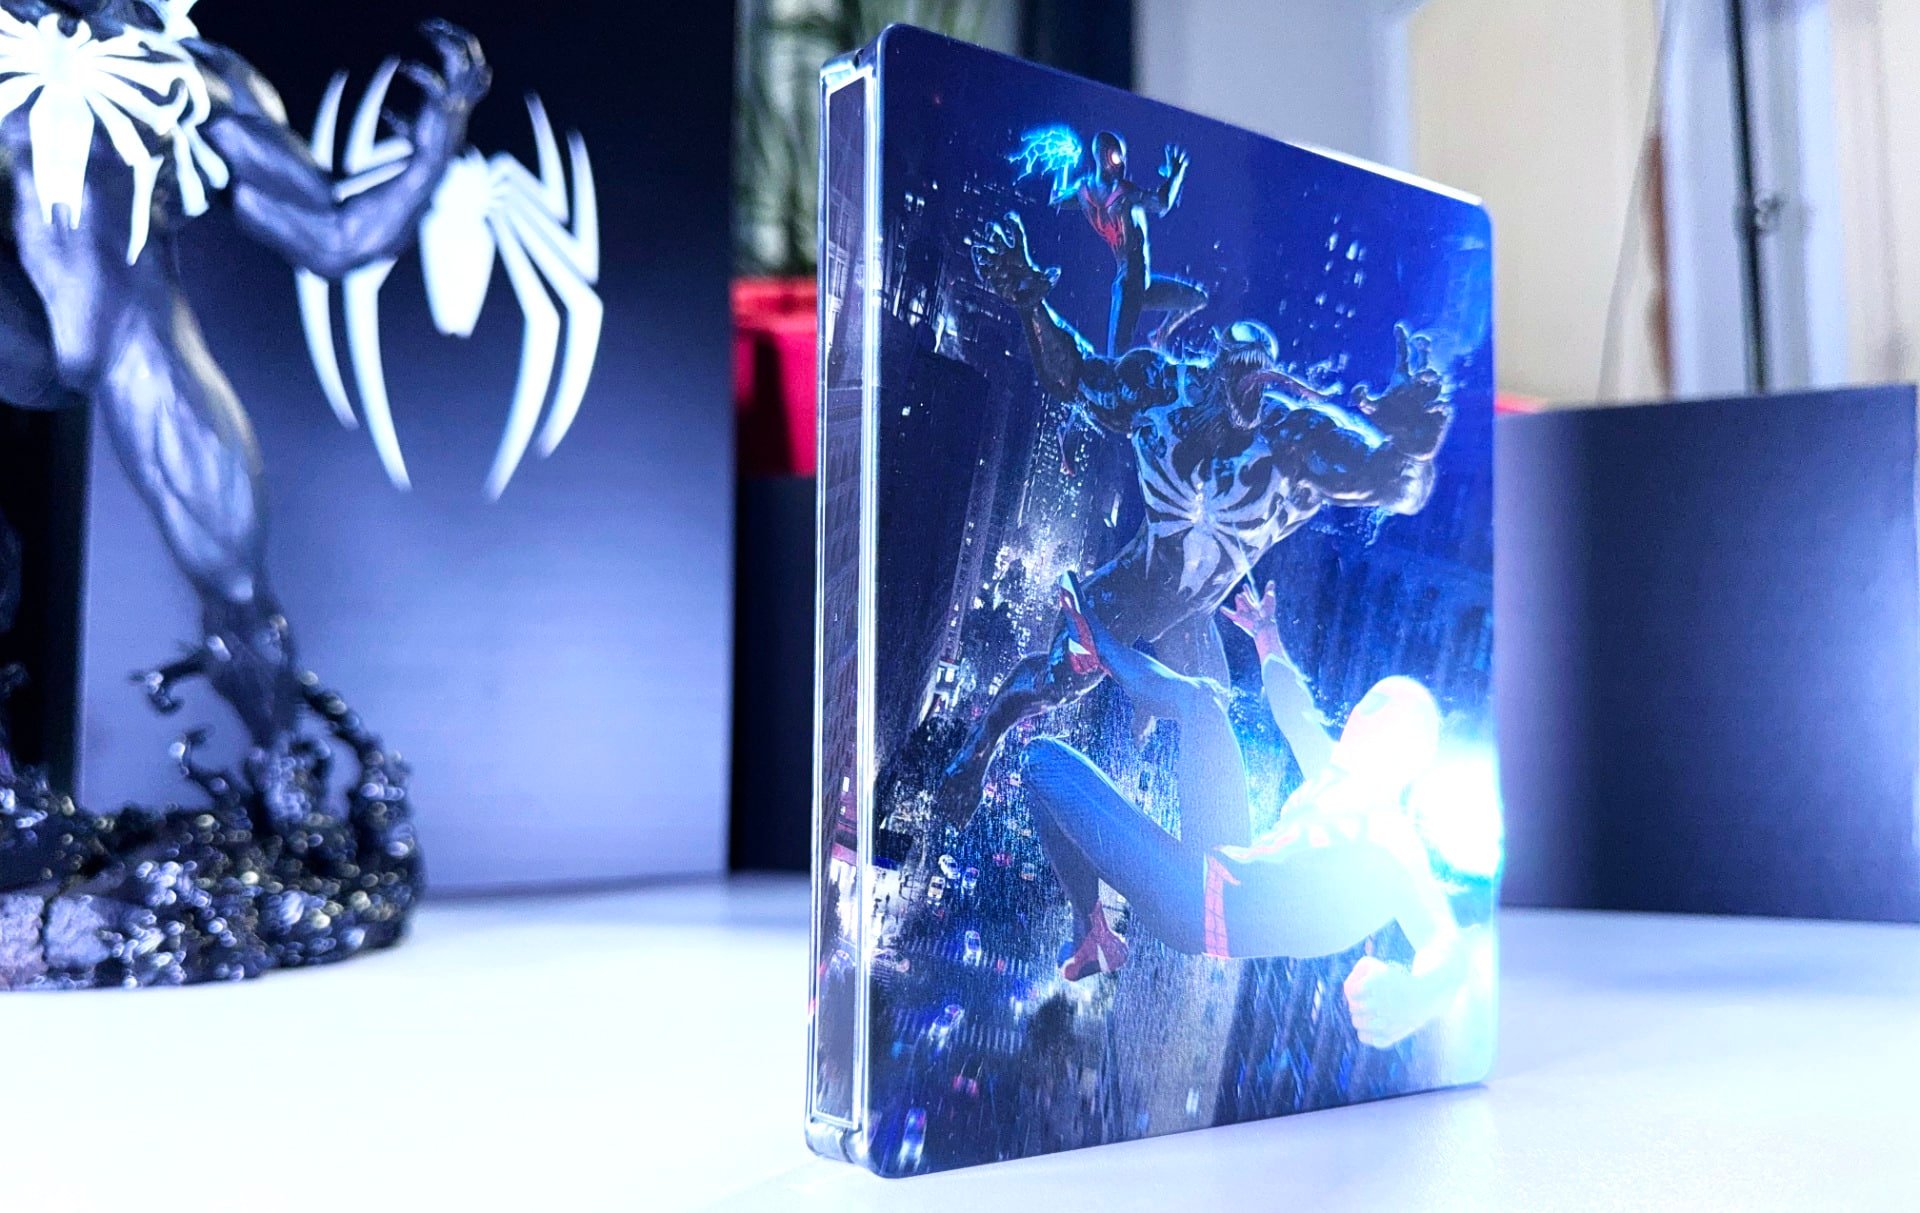 IGN on X: Marvel's Spider-Man 2 will cost $69.99, $79.99 (Digital Deluxe),  and $229.99 (Collector's Edition). Which version are you getting?  #IGNSummerOfGaming  / X